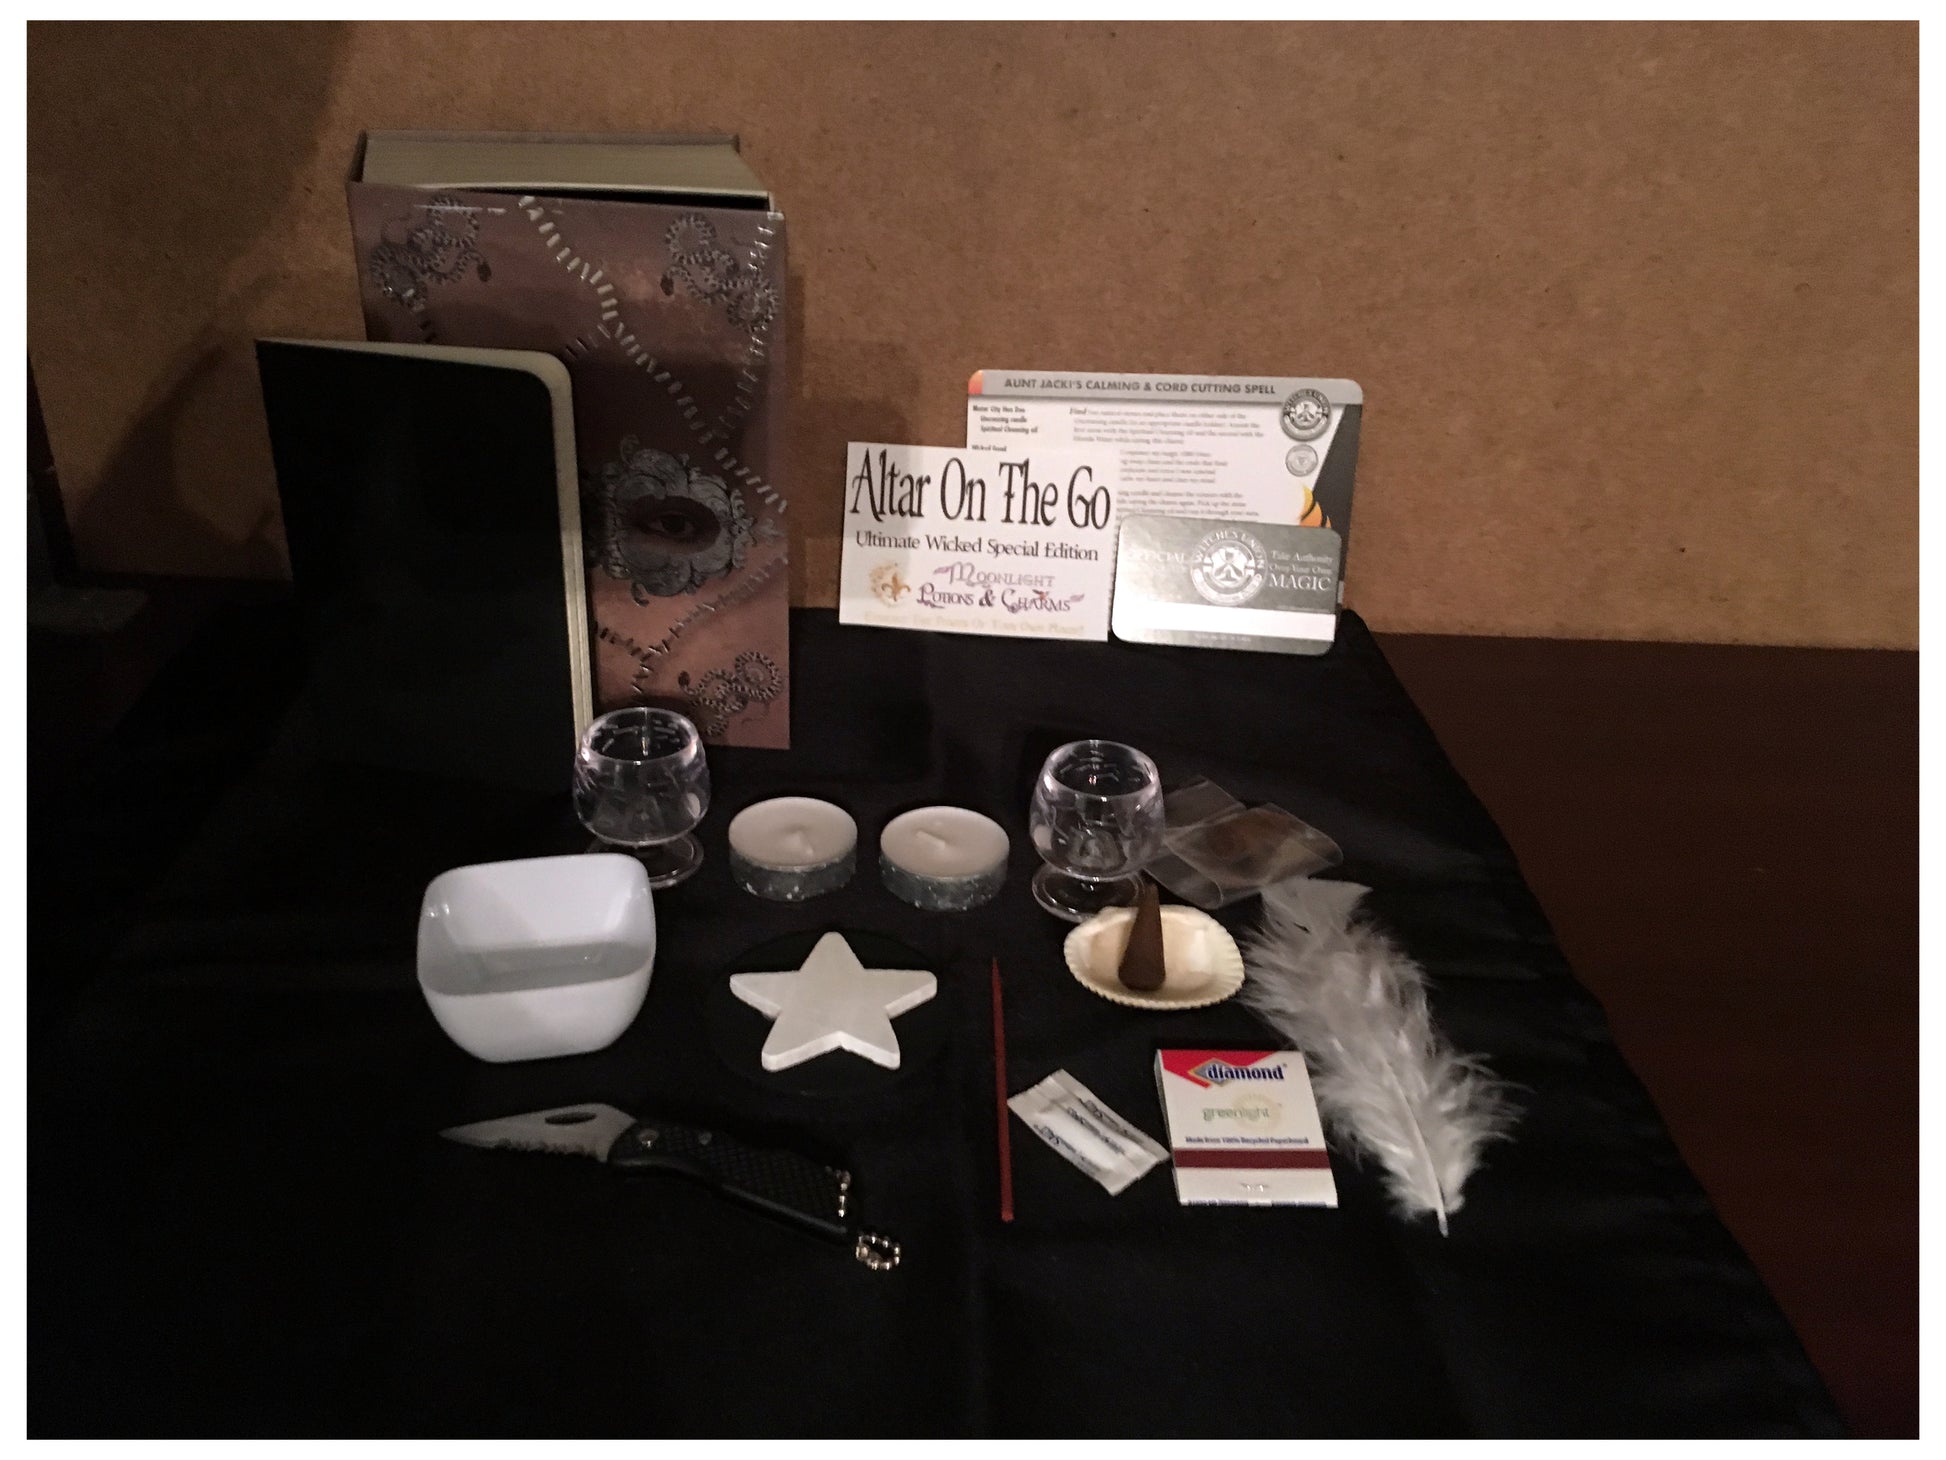 Altar On The Go The Ultimately Wicked Special Edition - Moonlight Potions & Charms, Compact Altar Set, BOS, Spell, Witch Card